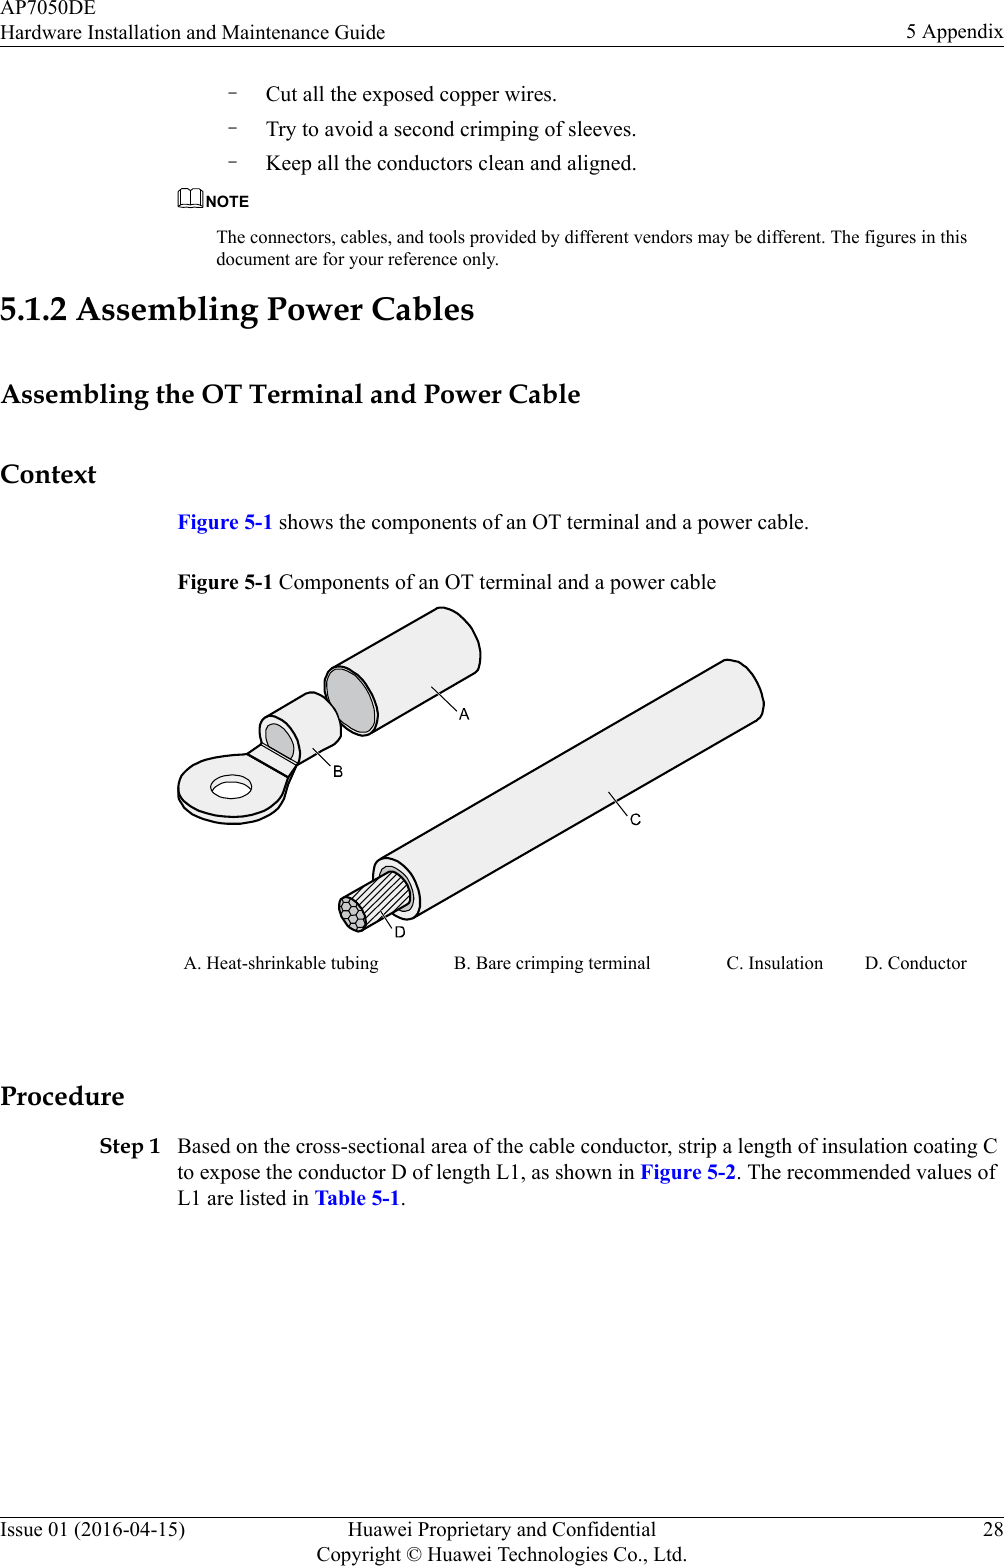 –Cut all the exposed copper wires.–Try to avoid a second crimping of sleeves.–Keep all the conductors clean and aligned.NOTEThe connectors, cables, and tools provided by different vendors may be different. The figures in thisdocument are for your reference only.5.1.2 Assembling Power CablesAssembling the OT Terminal and Power CableContextFigure 5-1 shows the components of an OT terminal and a power cable.Figure 5-1 Components of an OT terminal and a power cableA. Heat-shrinkable tubing B. Bare crimping terminal C. Insulation D. Conductor ProcedureStep 1 Based on the cross-sectional area of the cable conductor, strip a length of insulation coating Cto expose the conductor D of length L1, as shown in Figure 5-2. The recommended values ofL1 are listed in Table 5-1.AP7050DEHardware Installation and Maintenance Guide 5 AppendixIssue 01 (2016-04-15) Huawei Proprietary and ConfidentialCopyright © Huawei Technologies Co., Ltd.28